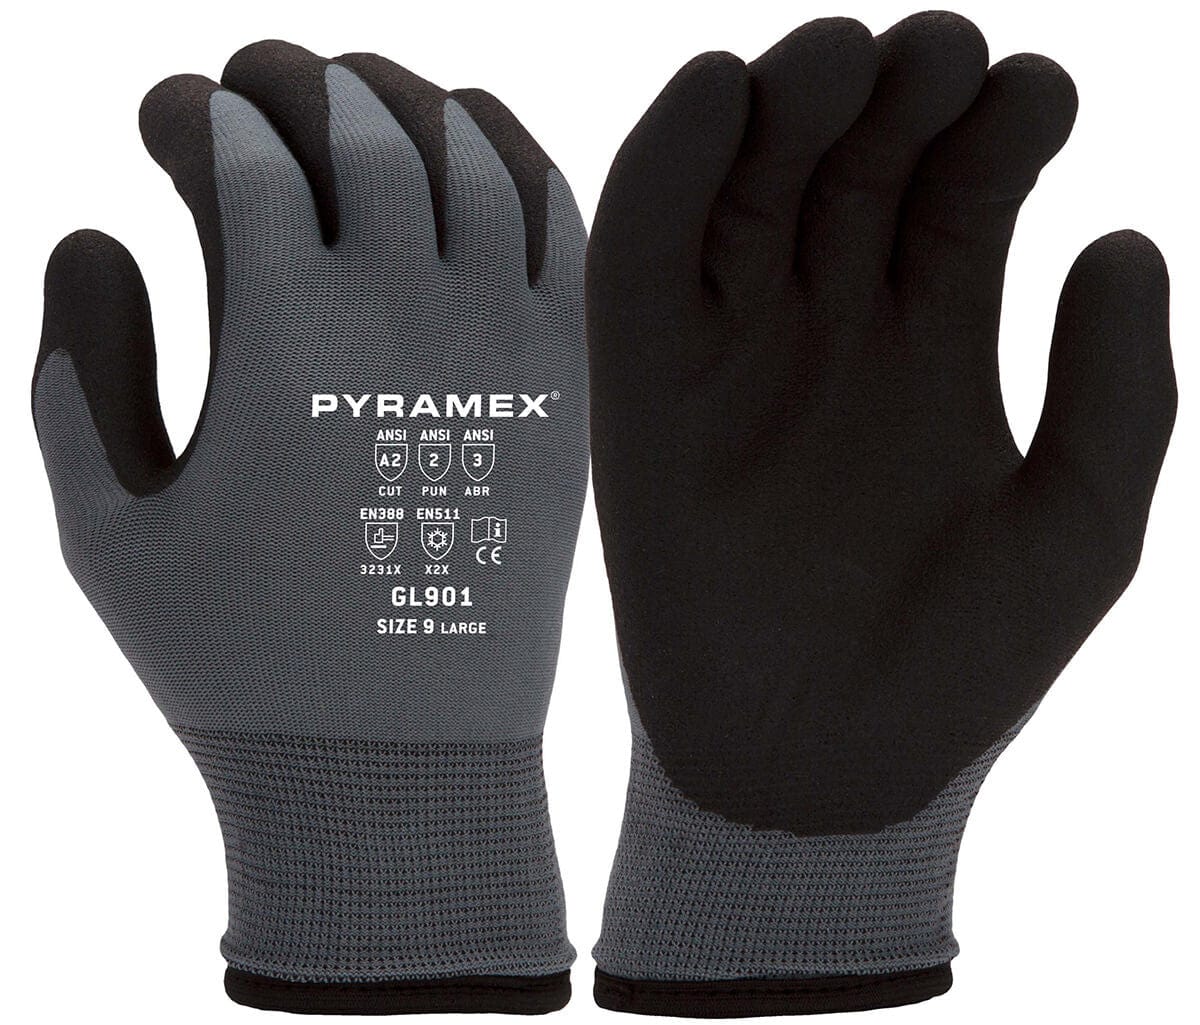 Pyramex GL901 Insulated Cut-Resistant A2 Dipped Gloves GL901